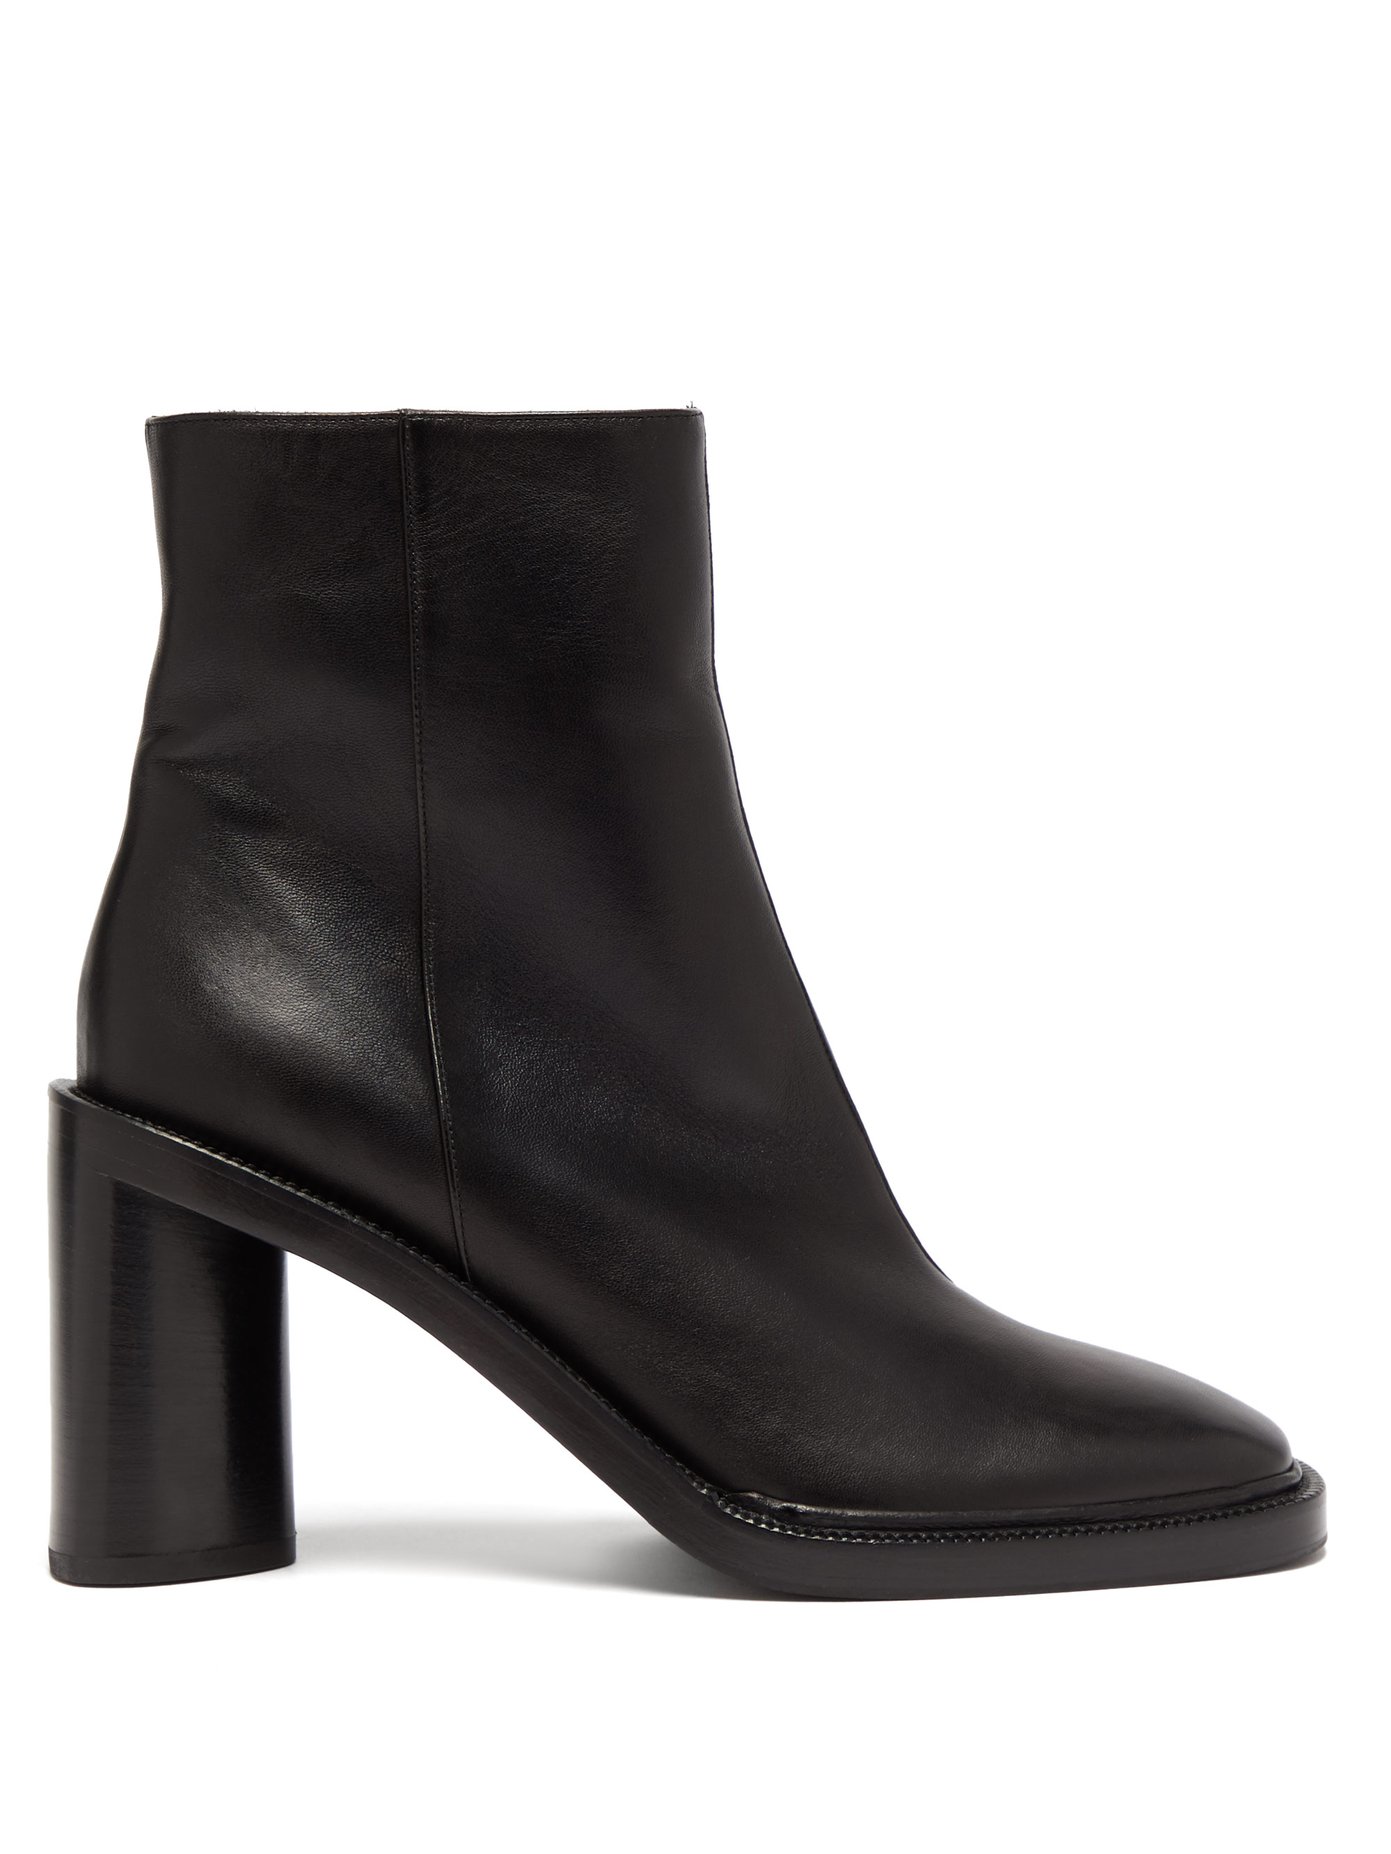 flat ankle boots with toe cap detail